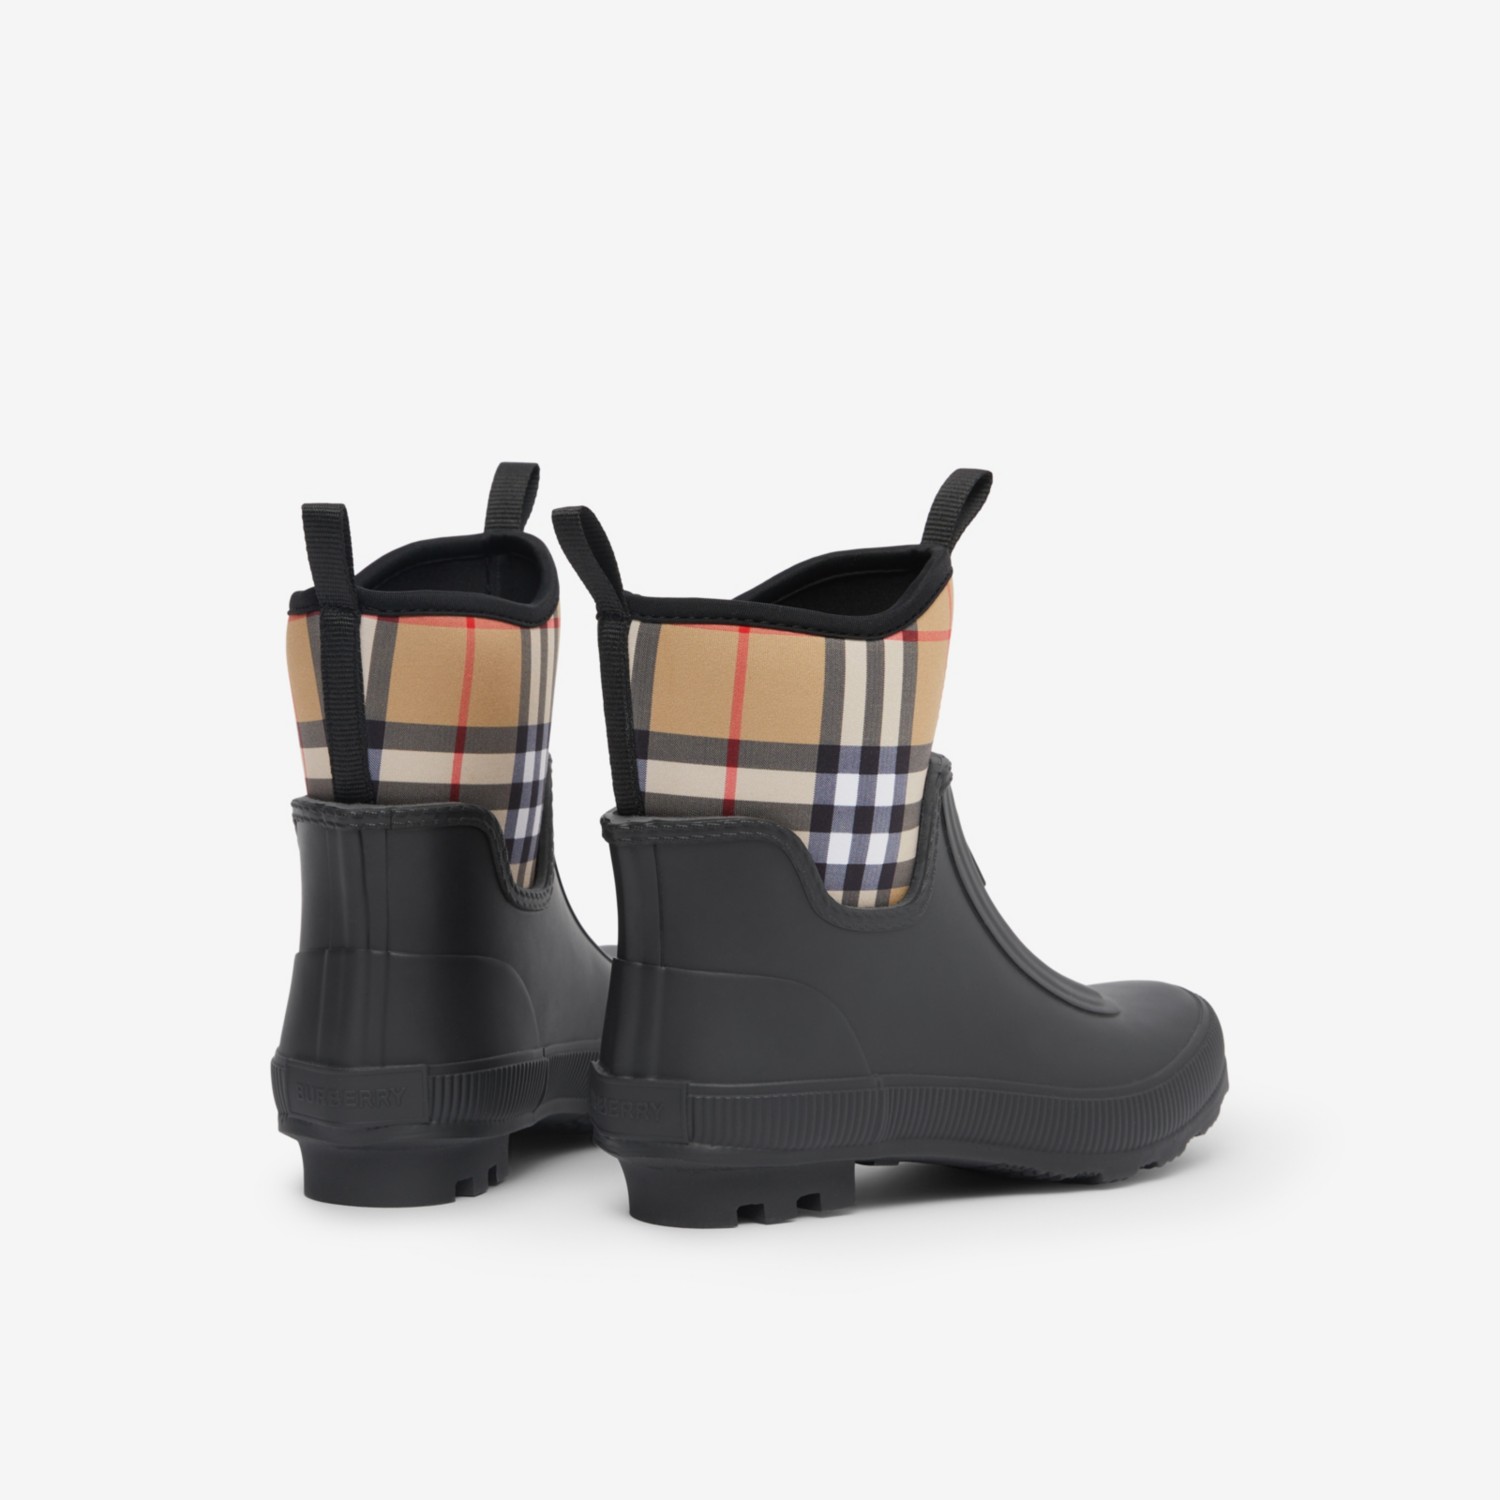 Vintage Check Neoprene and Rubber Rain Boots